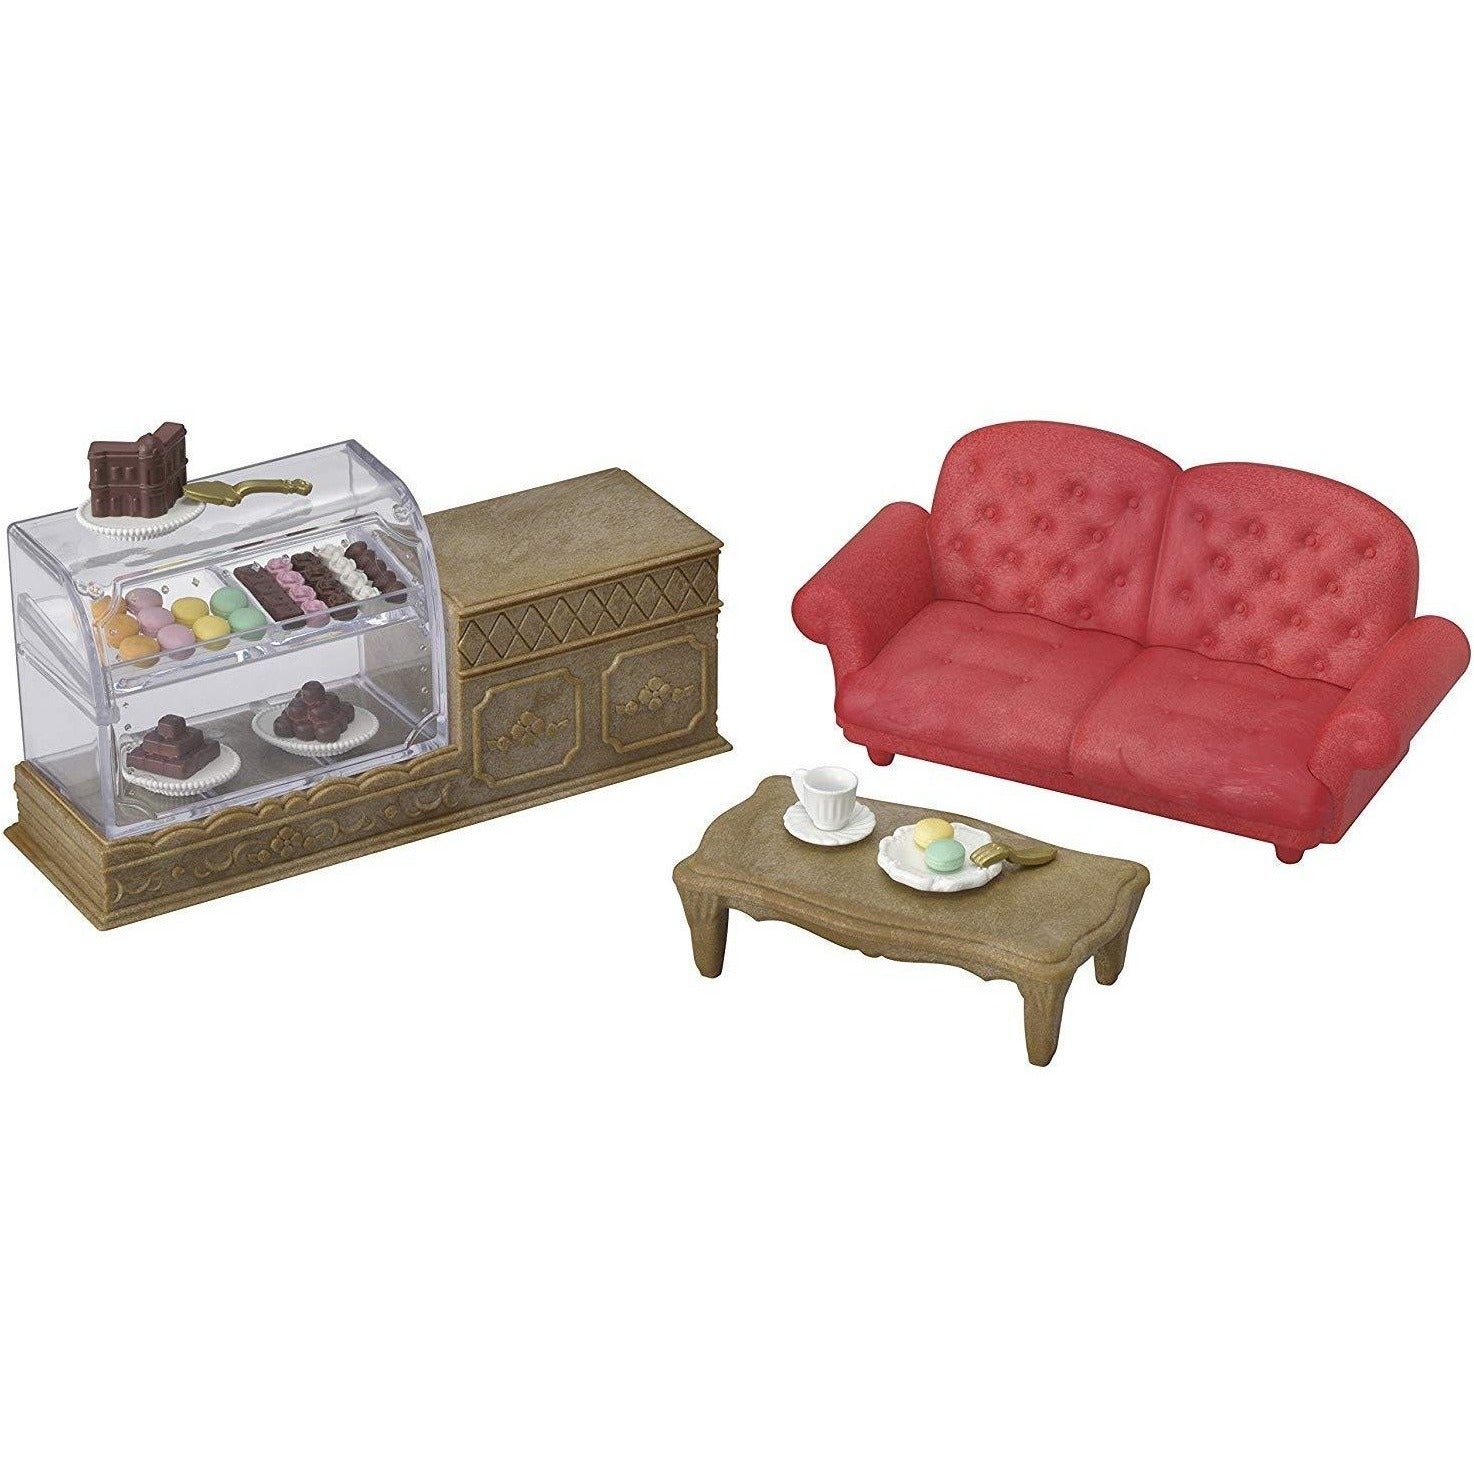 Calico Critters Chocolate Lounge Calico Critters